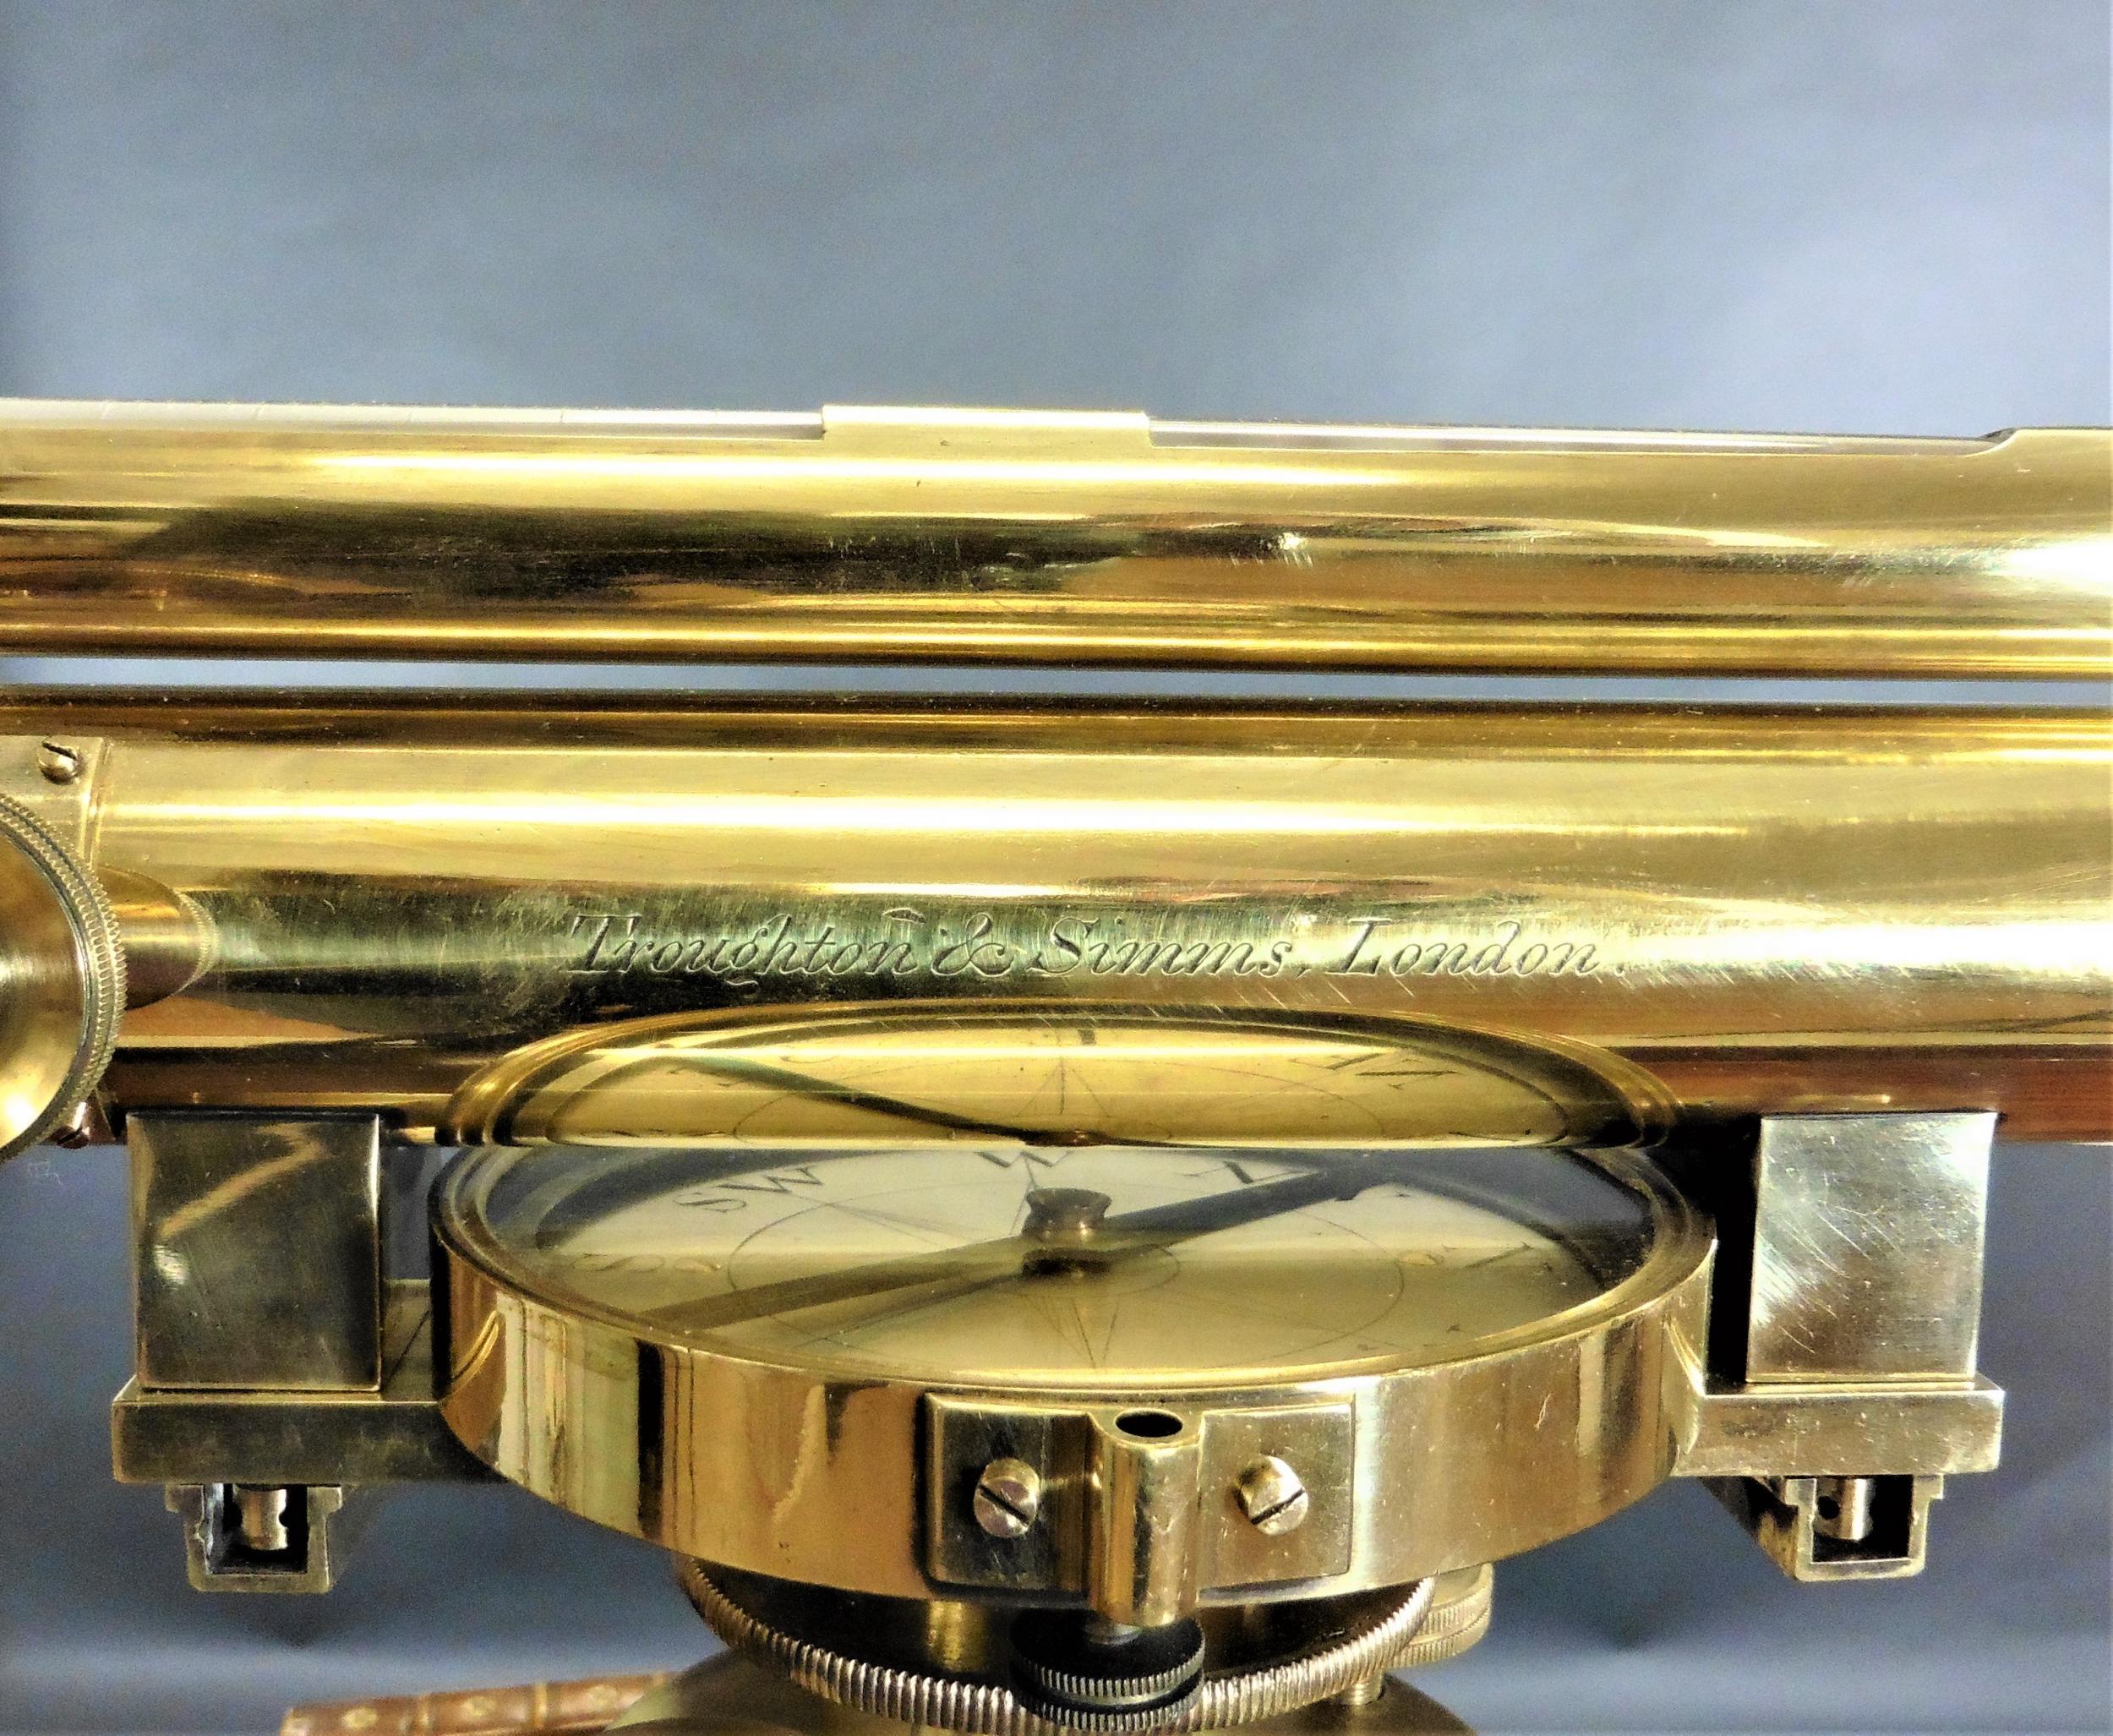 Brass Surveyors Level by Troughton & Simms, London

Sixteen inch extending telescope with original lacquer finish and spirit level.

The compass has a three inch silvered register plate, fine pivot and brass locking lever and is signed